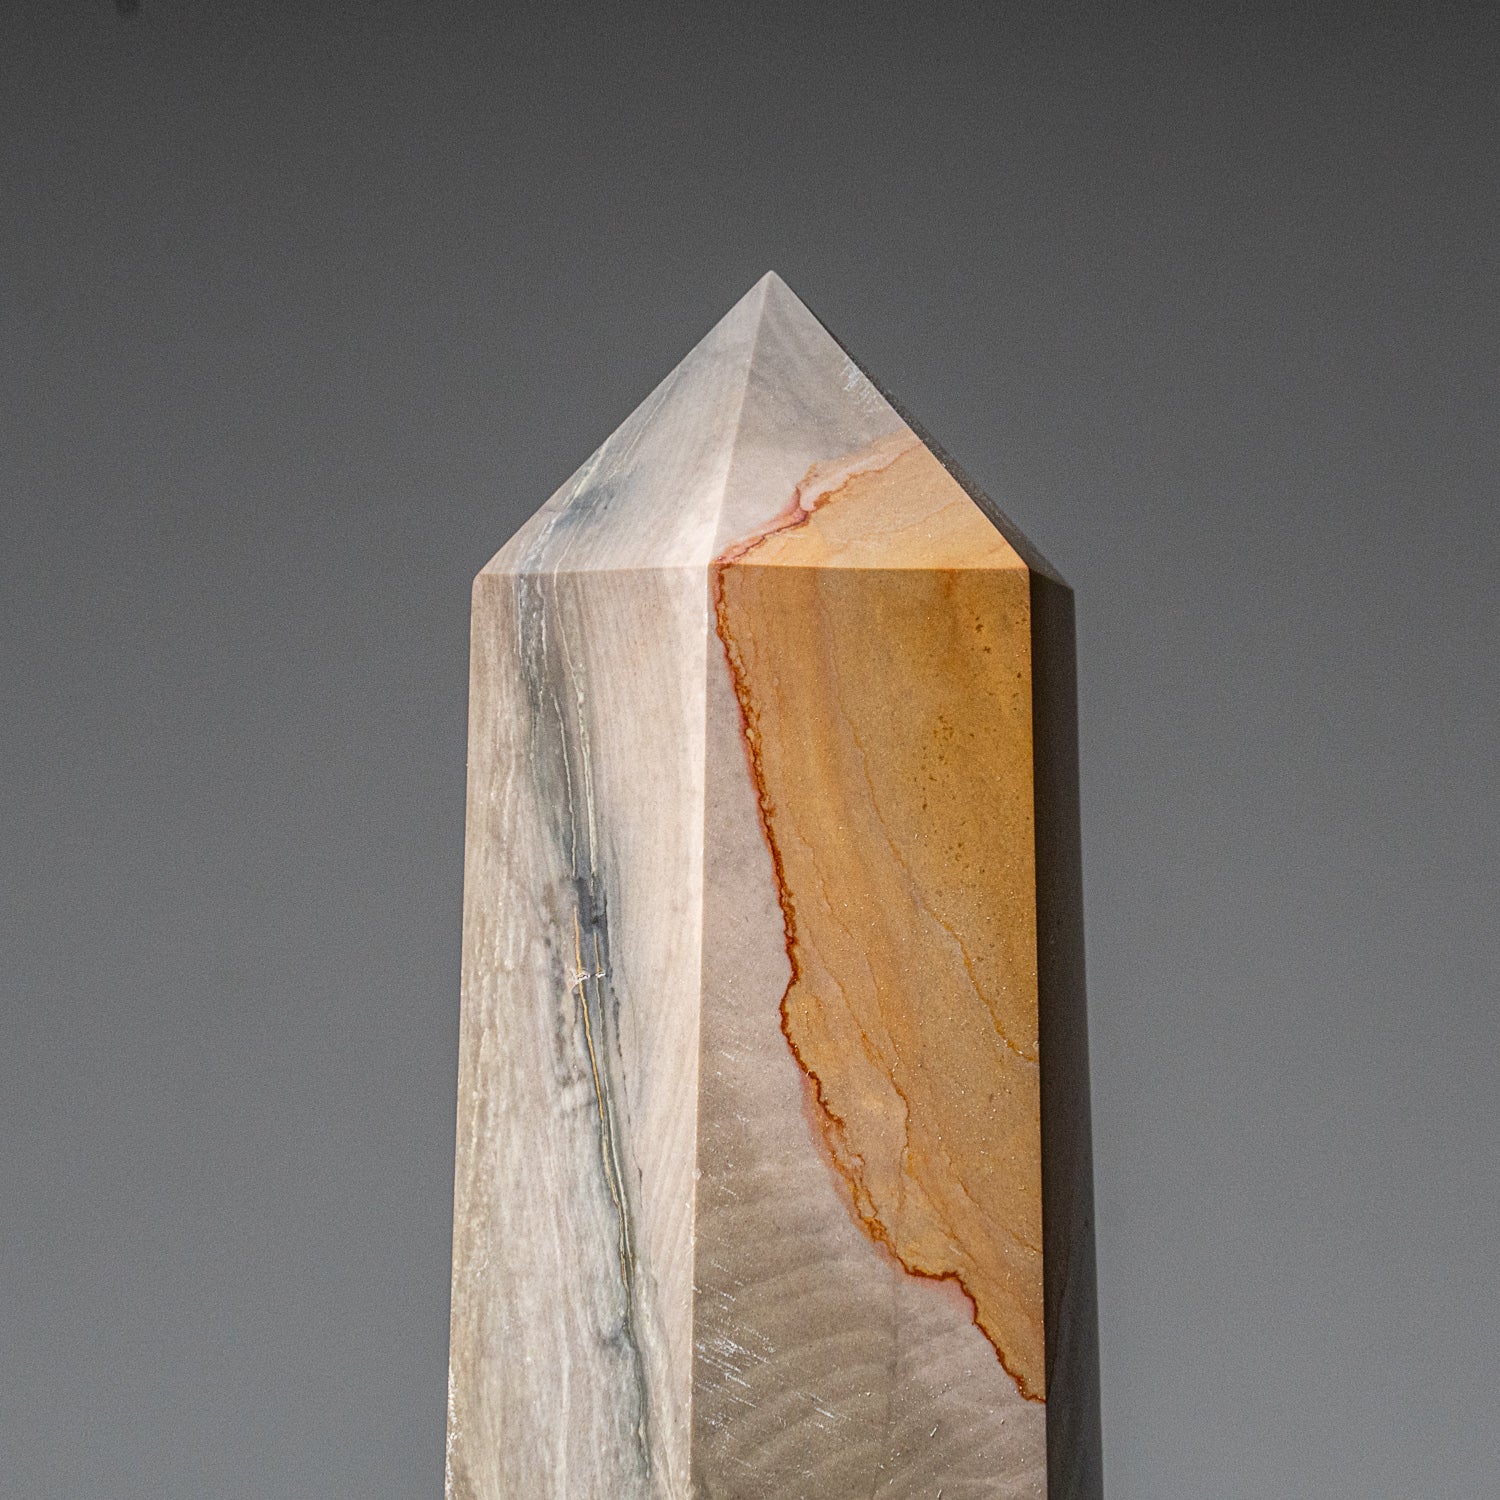 Polished Polychrome Point from Madagascar (2.5 lbs)